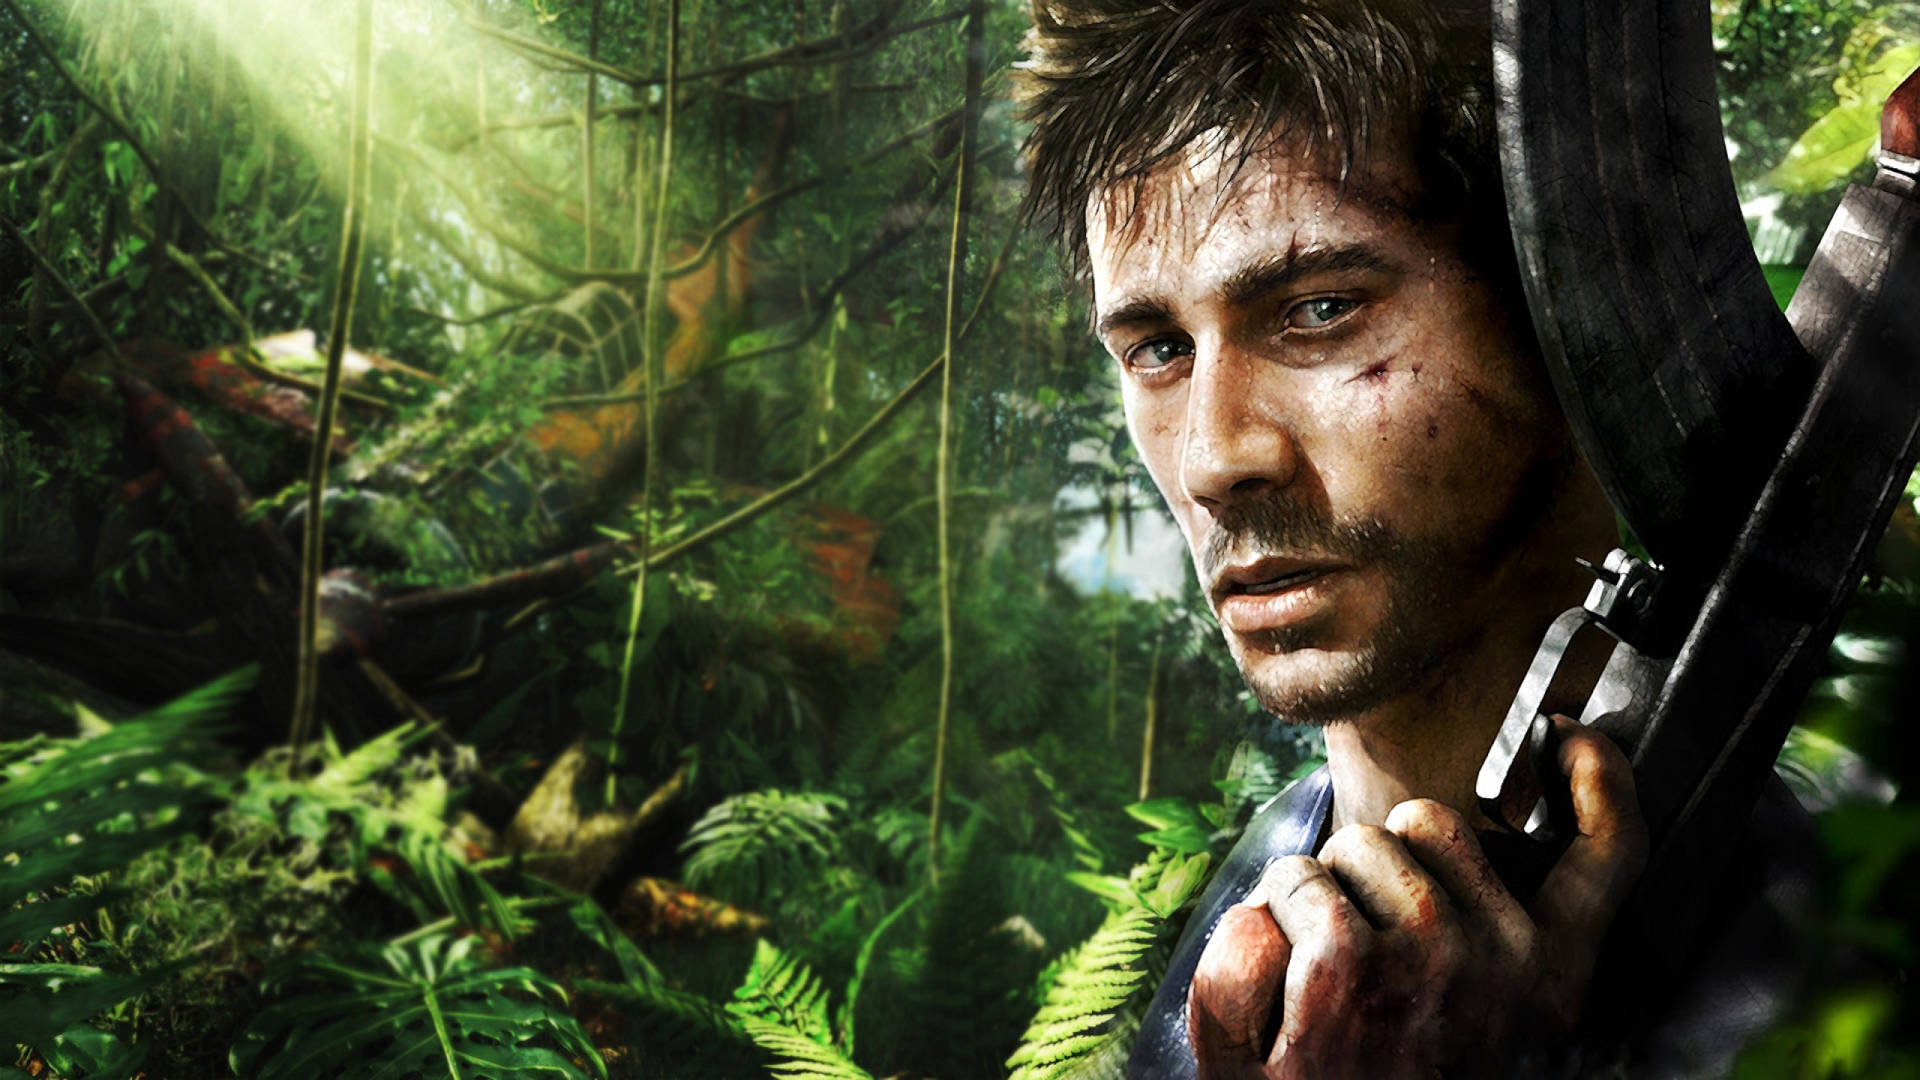 100+] Far Cry 3 Wallpapers | Wallpapers.Com